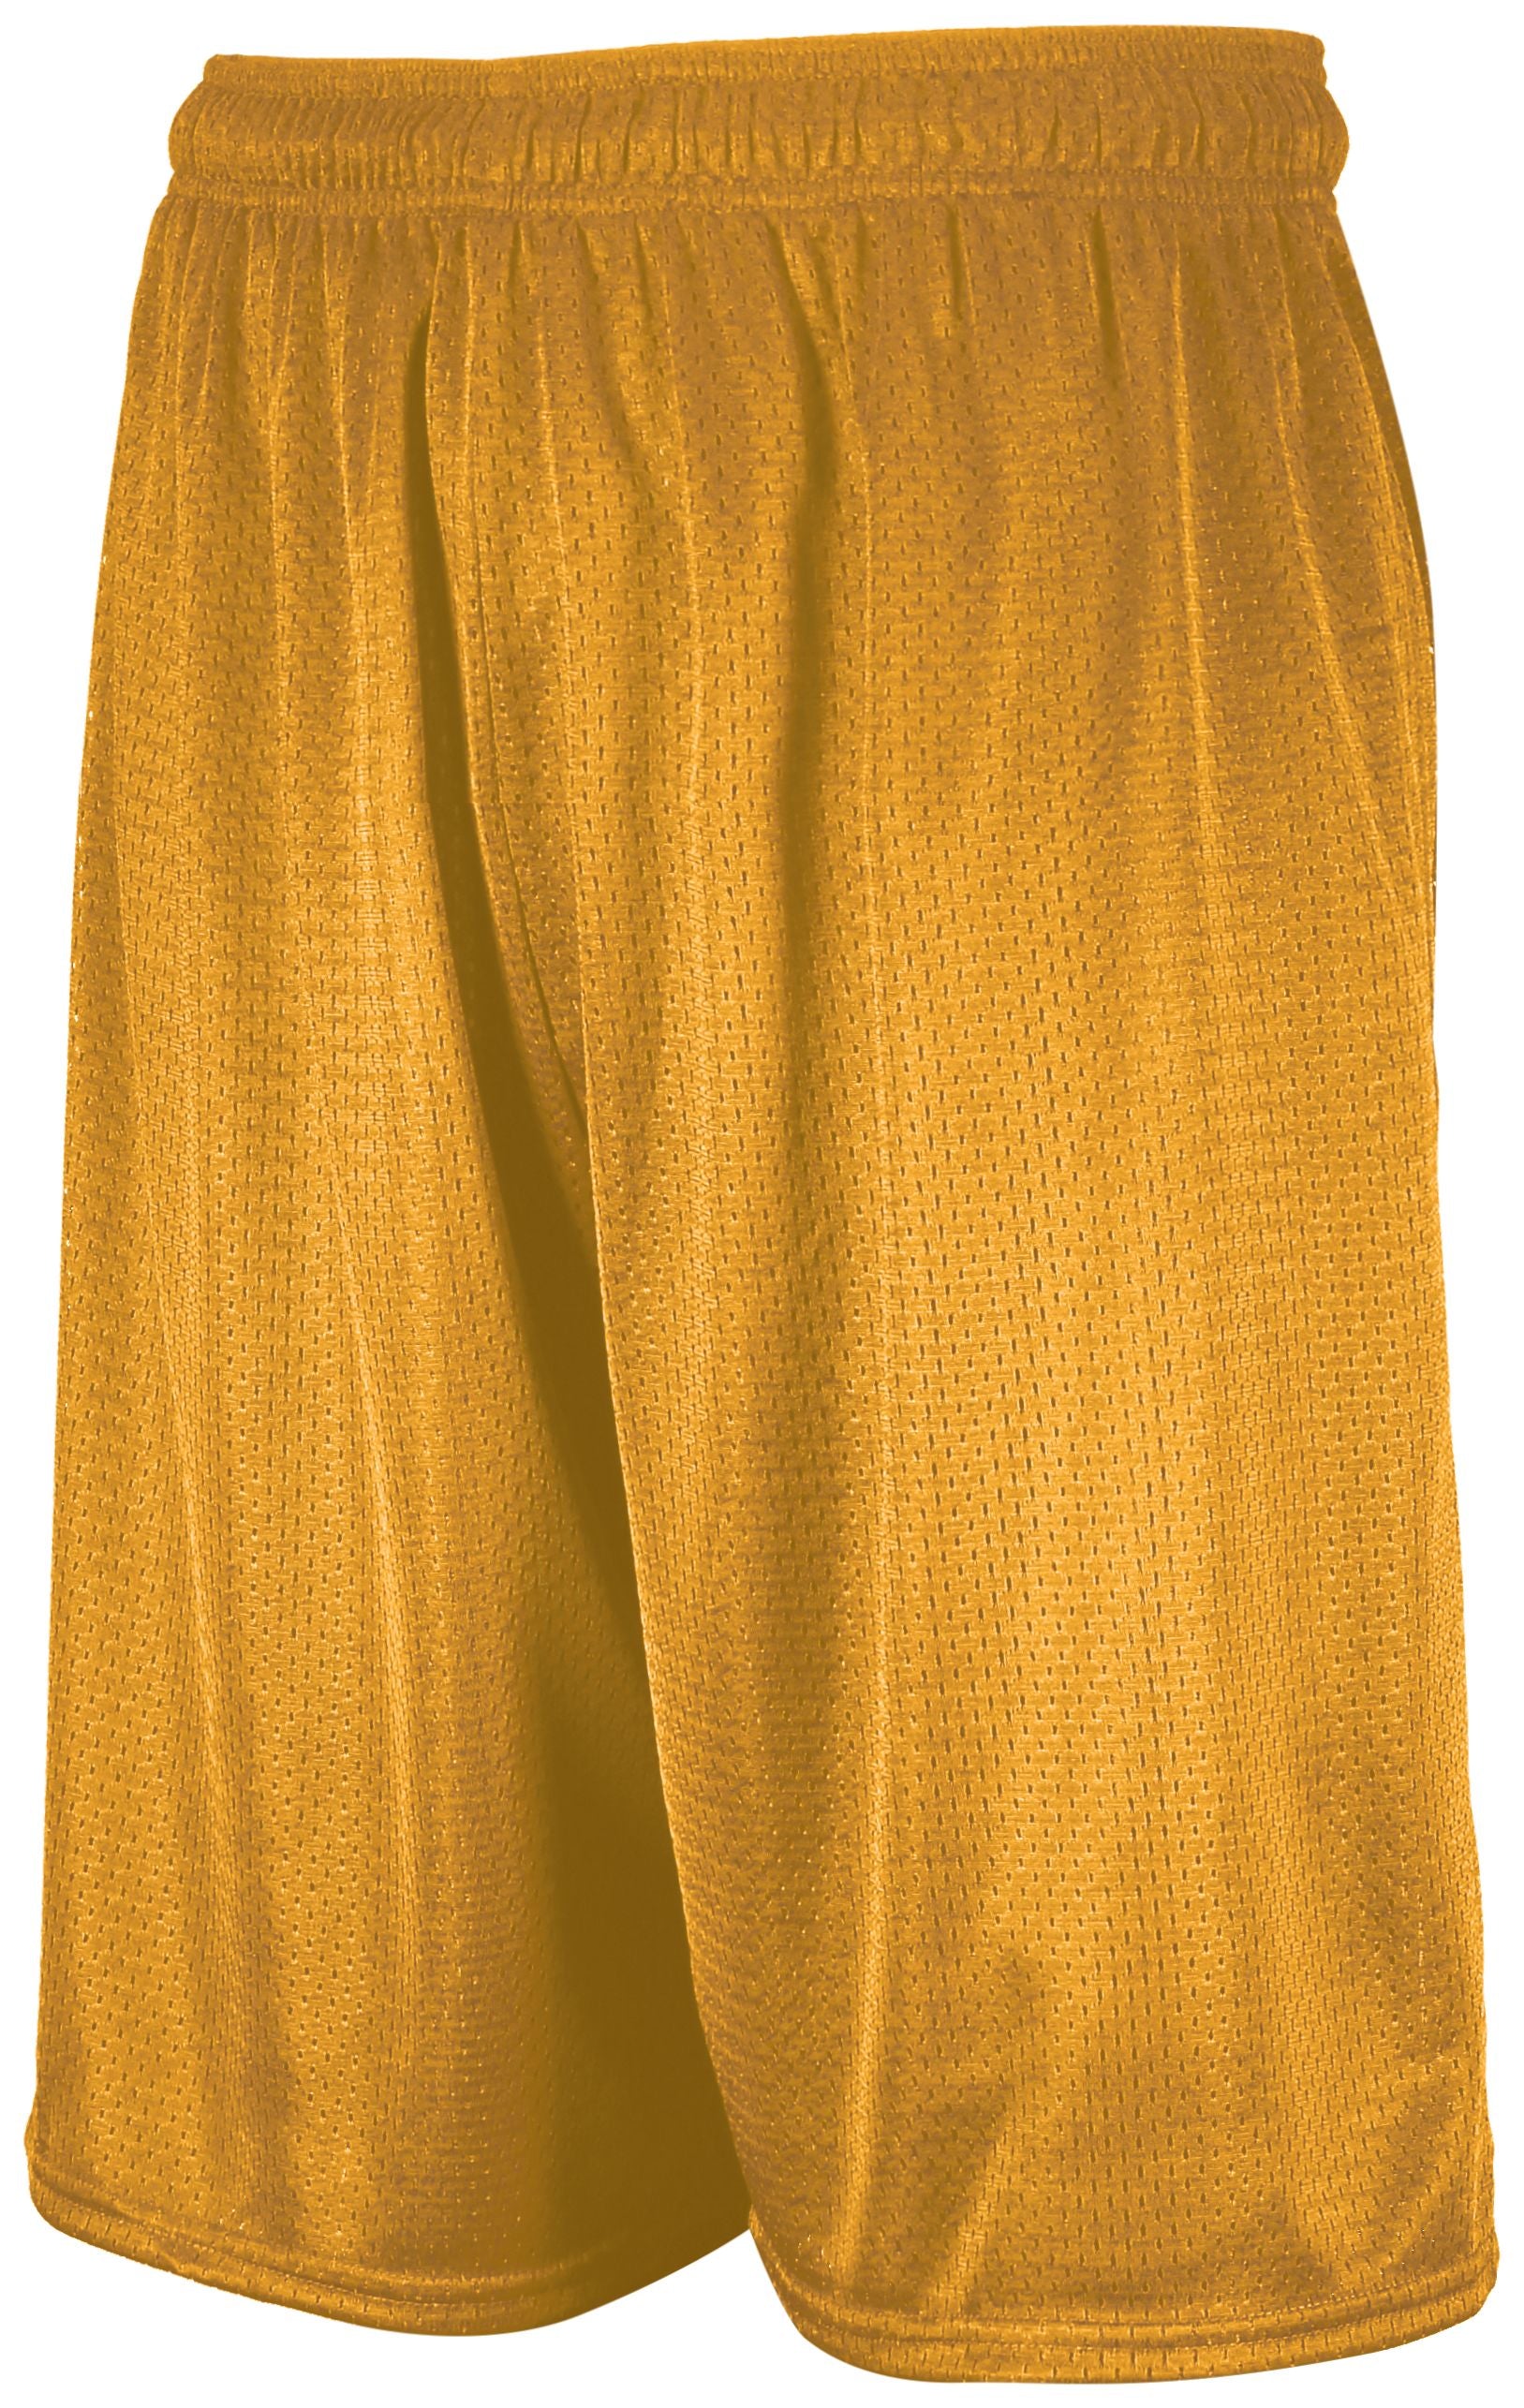 Russell Athletic Dri-Power Mesh Shorts in Gold  -Part of the Adult, Adult-Shorts, Russell-Athletic-Products product lines at KanaleyCreations.com